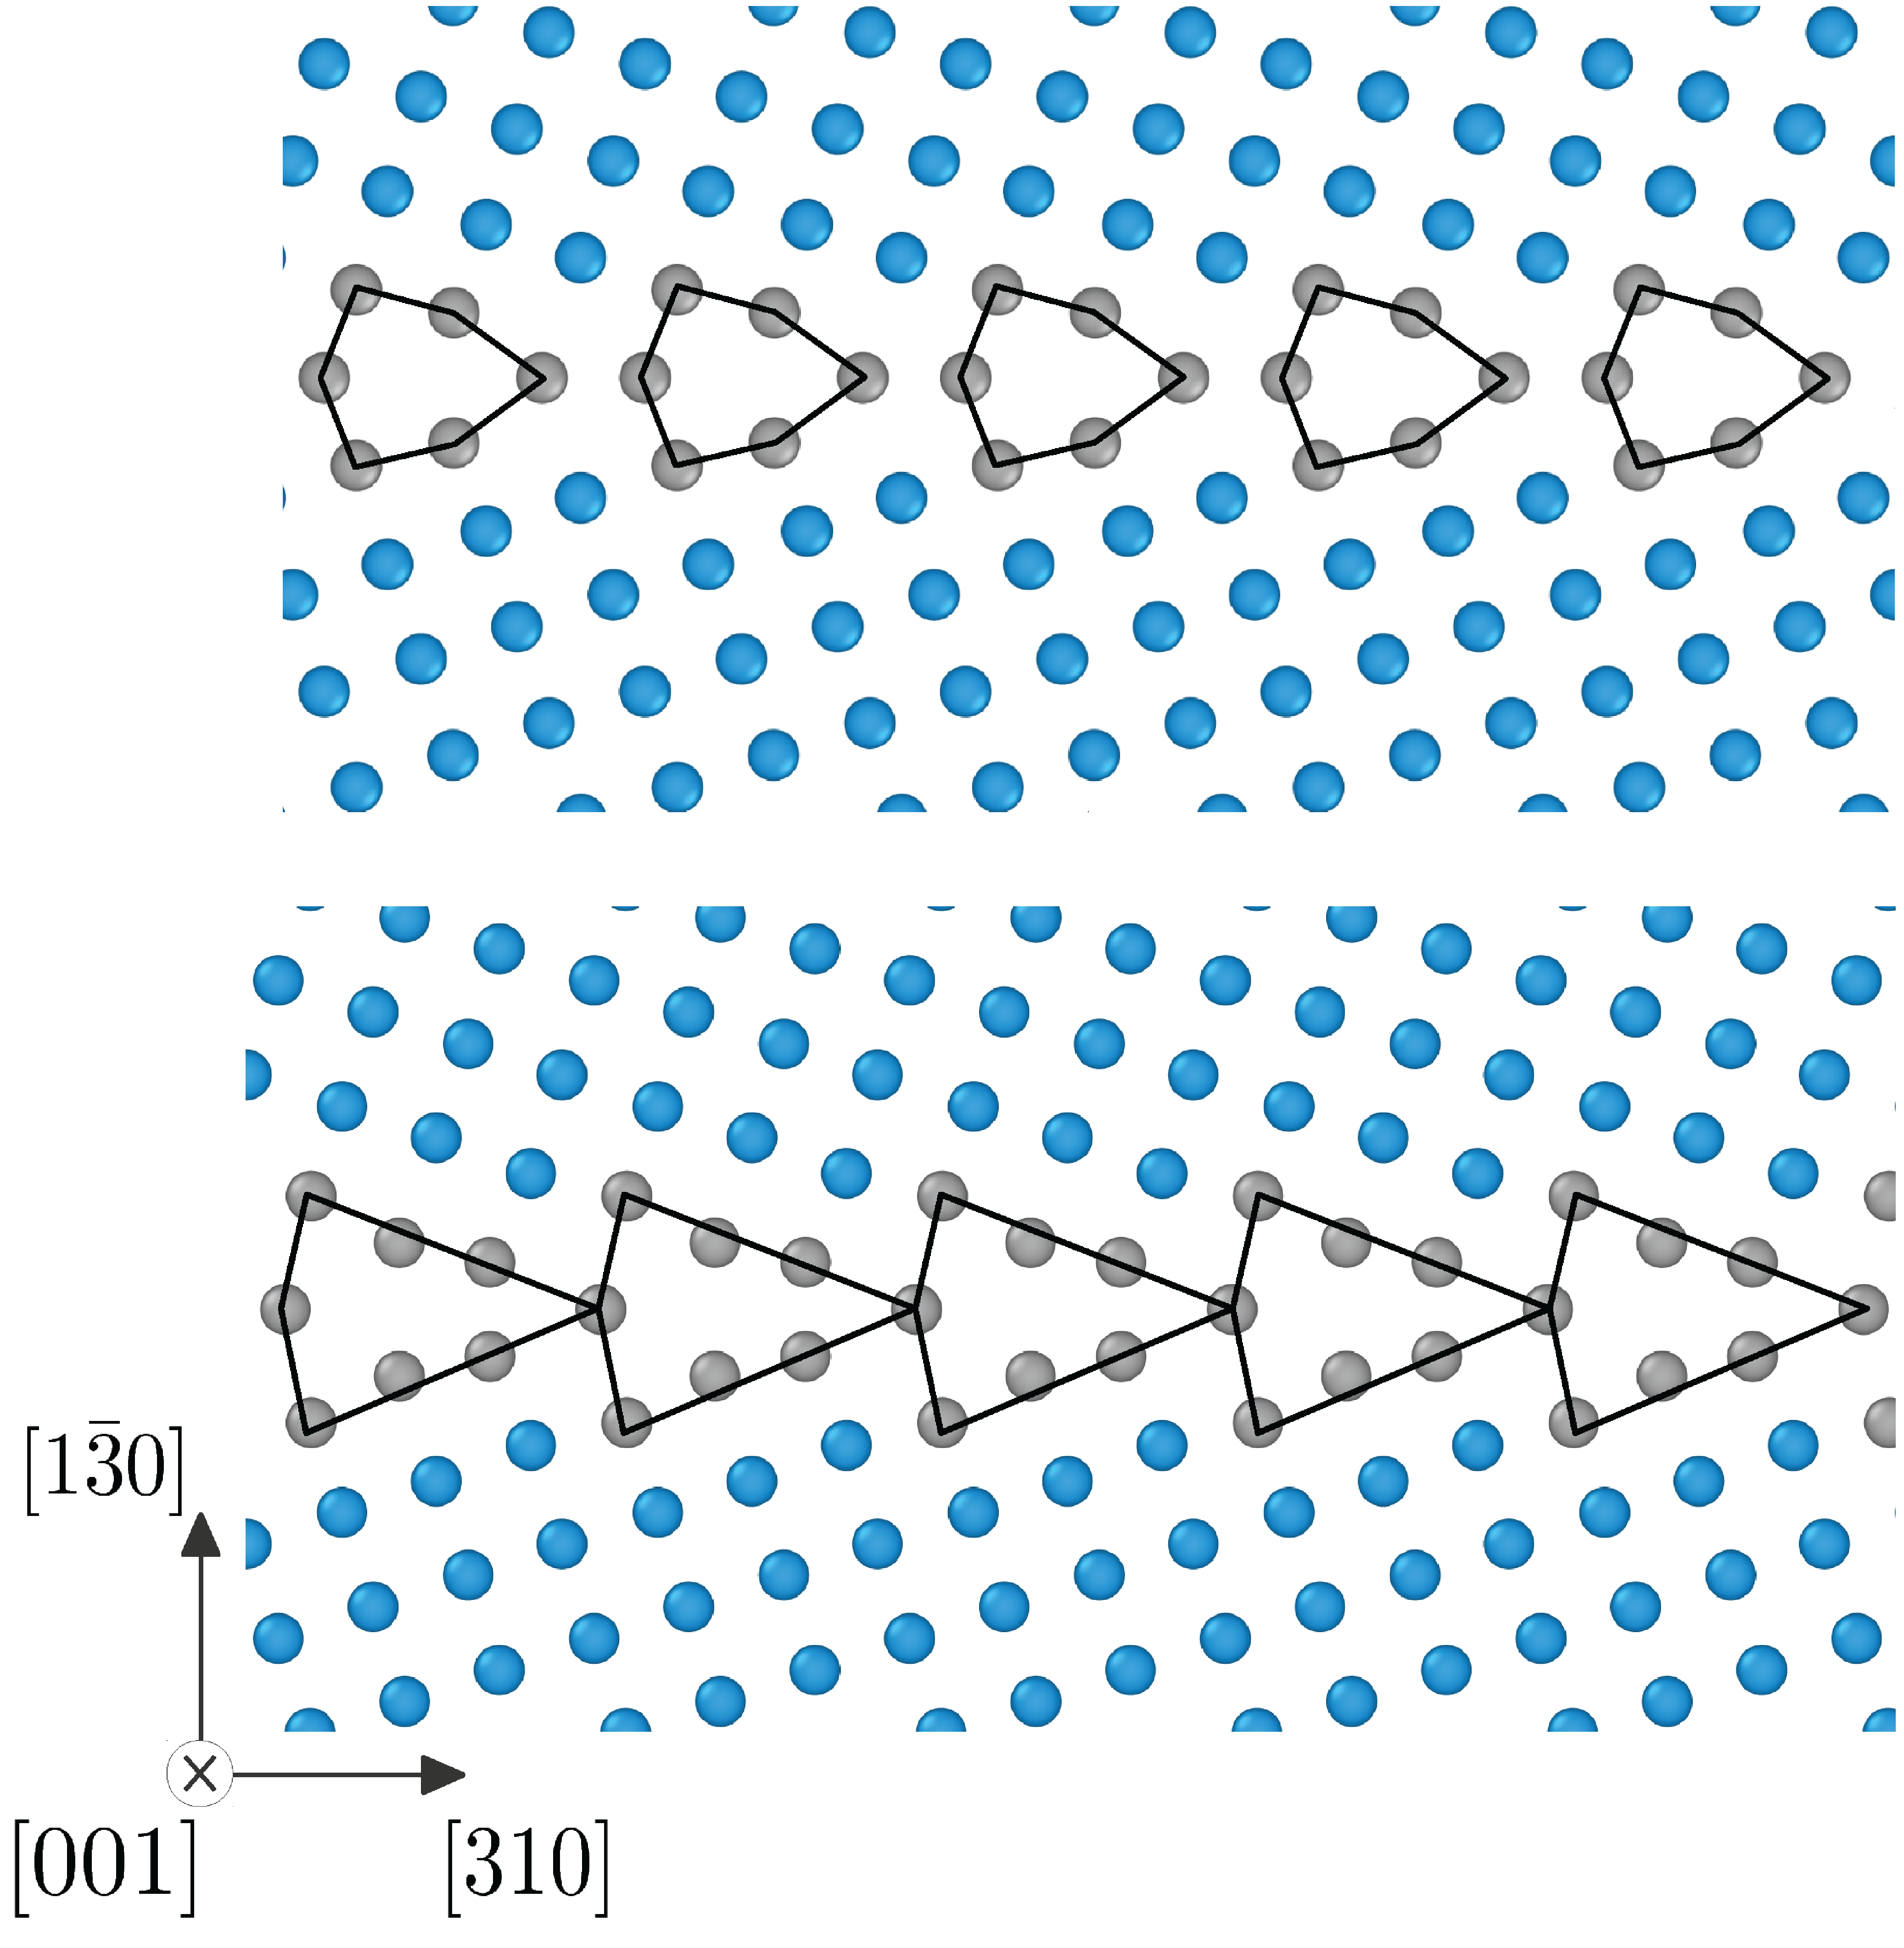 Phase transitions between two different phases of the Σ5(310)[001] grain boundary in fcc crystals.